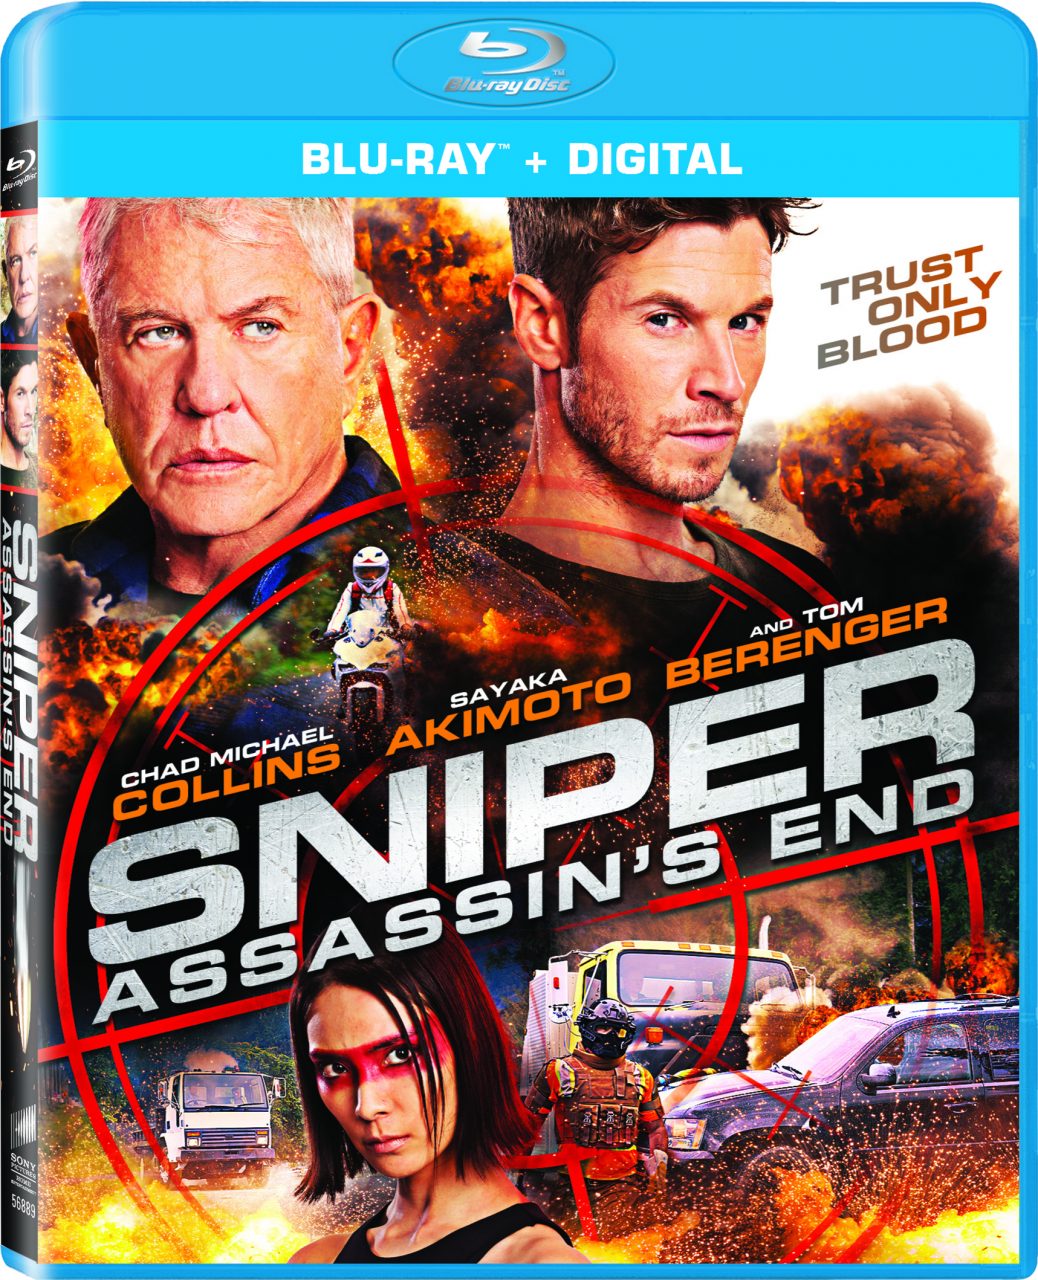 SNIPER: Assassin's End Blu-Ray Combo Pack cover (Sony Pictures Home Entertainment)